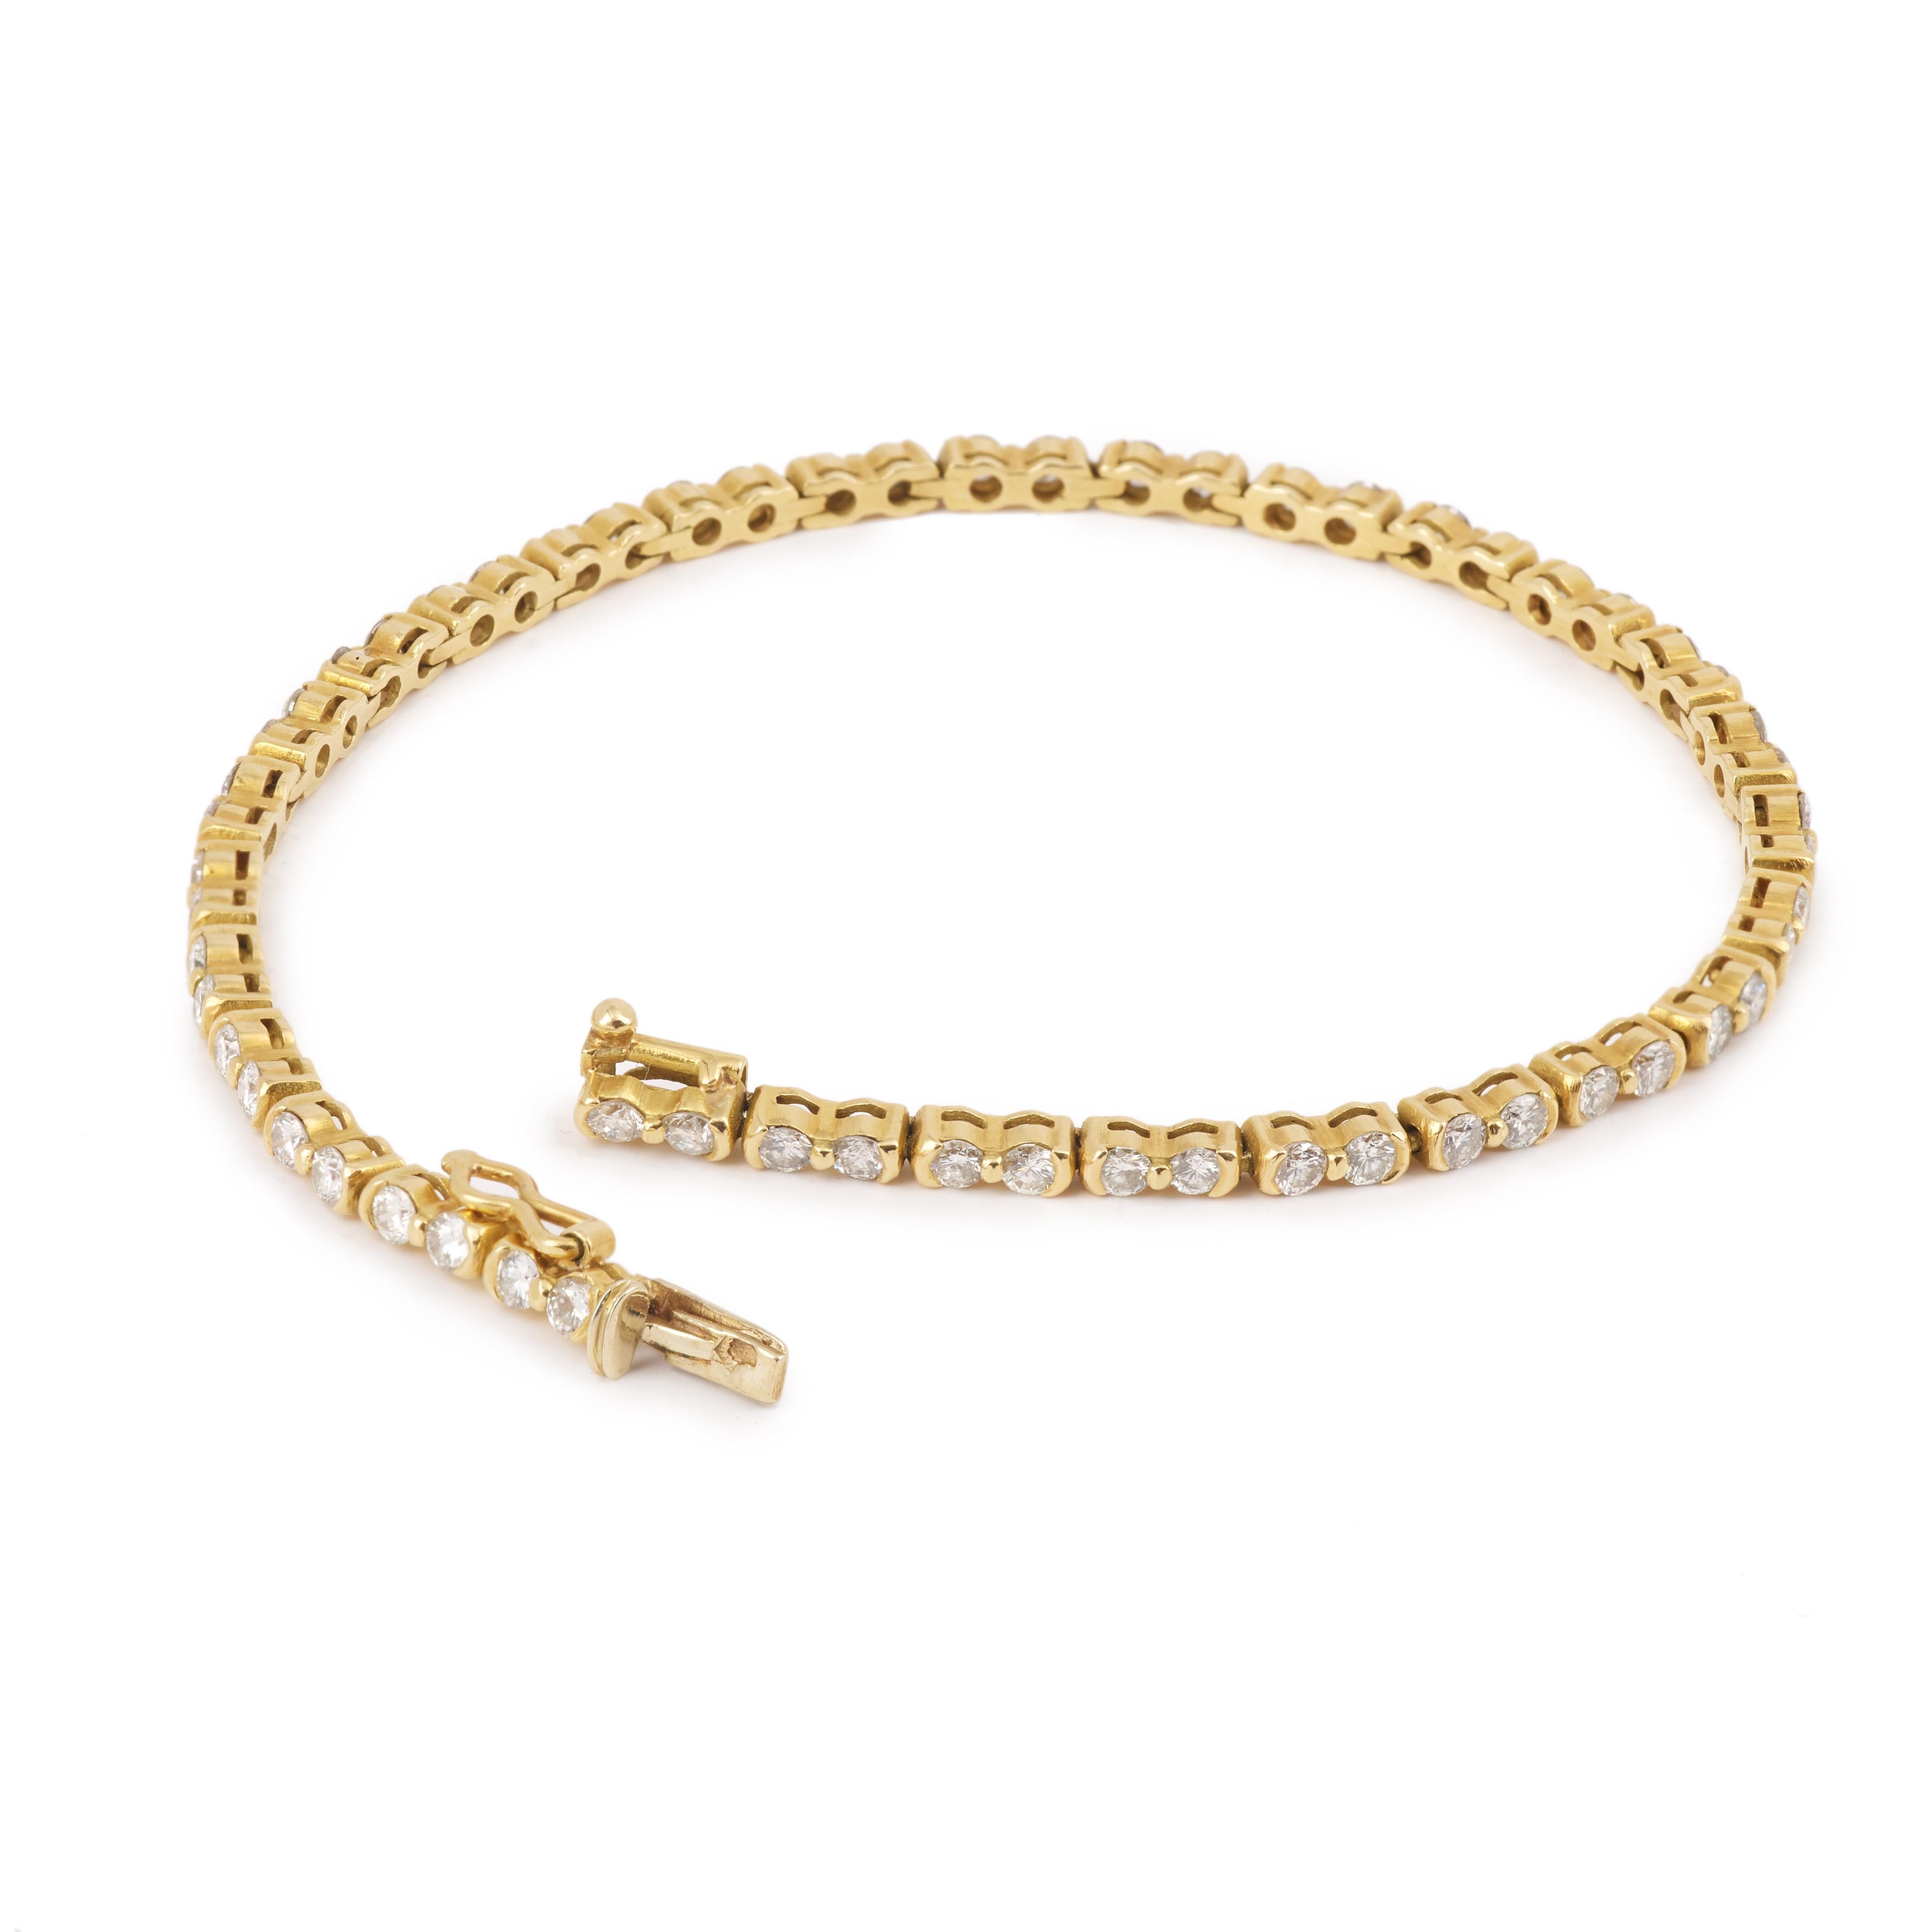 Elegant Chaumet line bracelet in 18 carat yellow gold set with 60 brilliant cut diamonds.

The bracelet is signed and numbered on the clasp (slightly patinated).

Total weight of diamonds: 1.20 carats

Bracelet length : 18 cm (7.10 inch)

Yellow